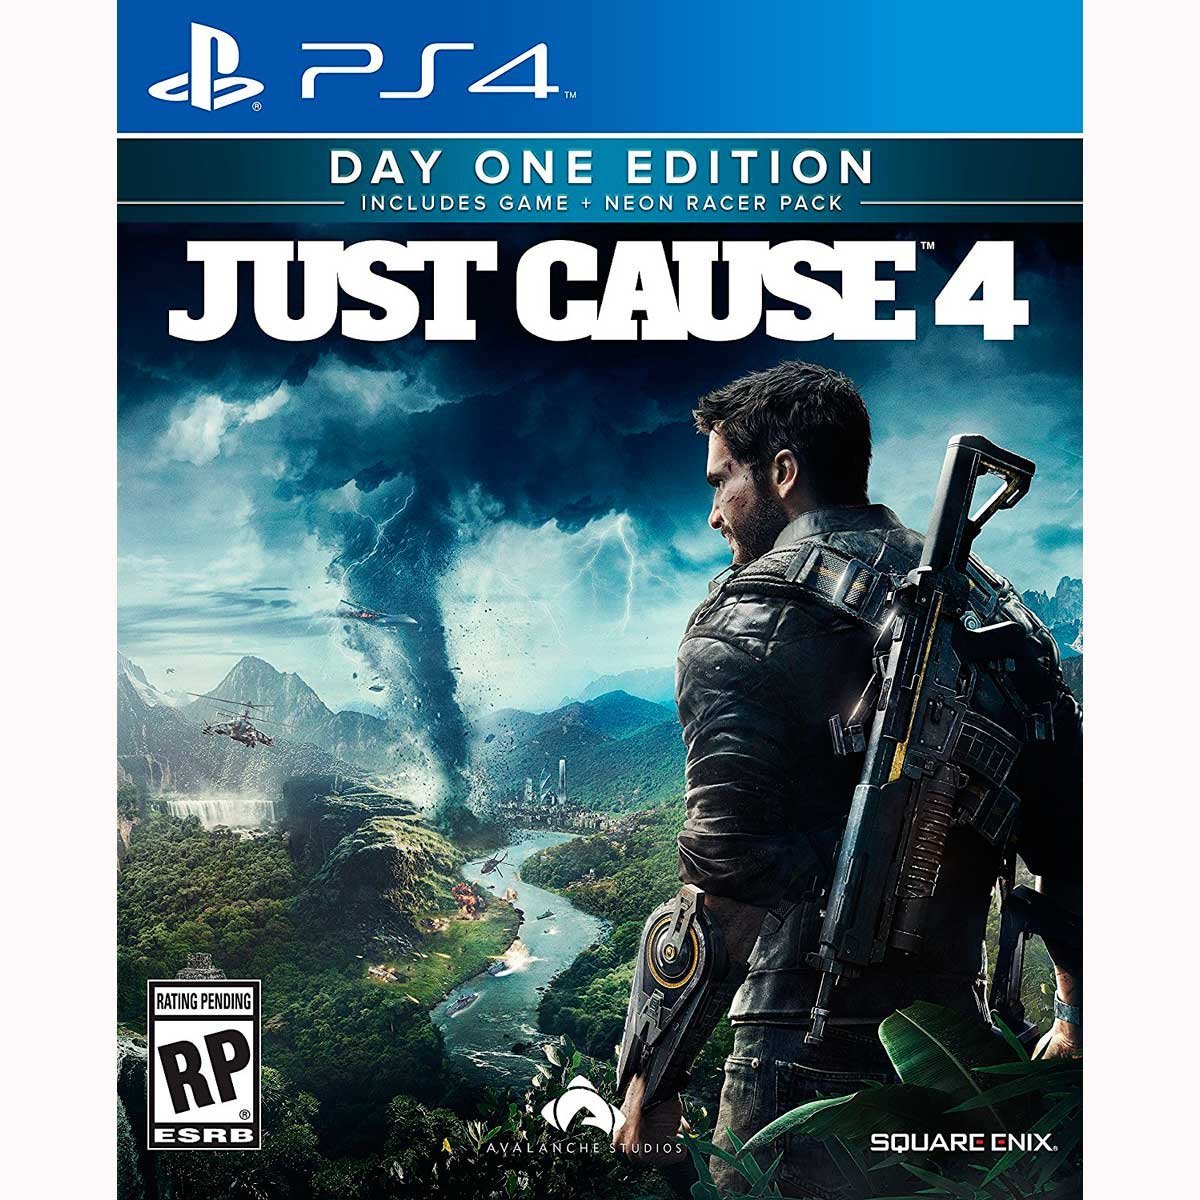 Ps4 Just Cause 4 Day One Limited Edition.